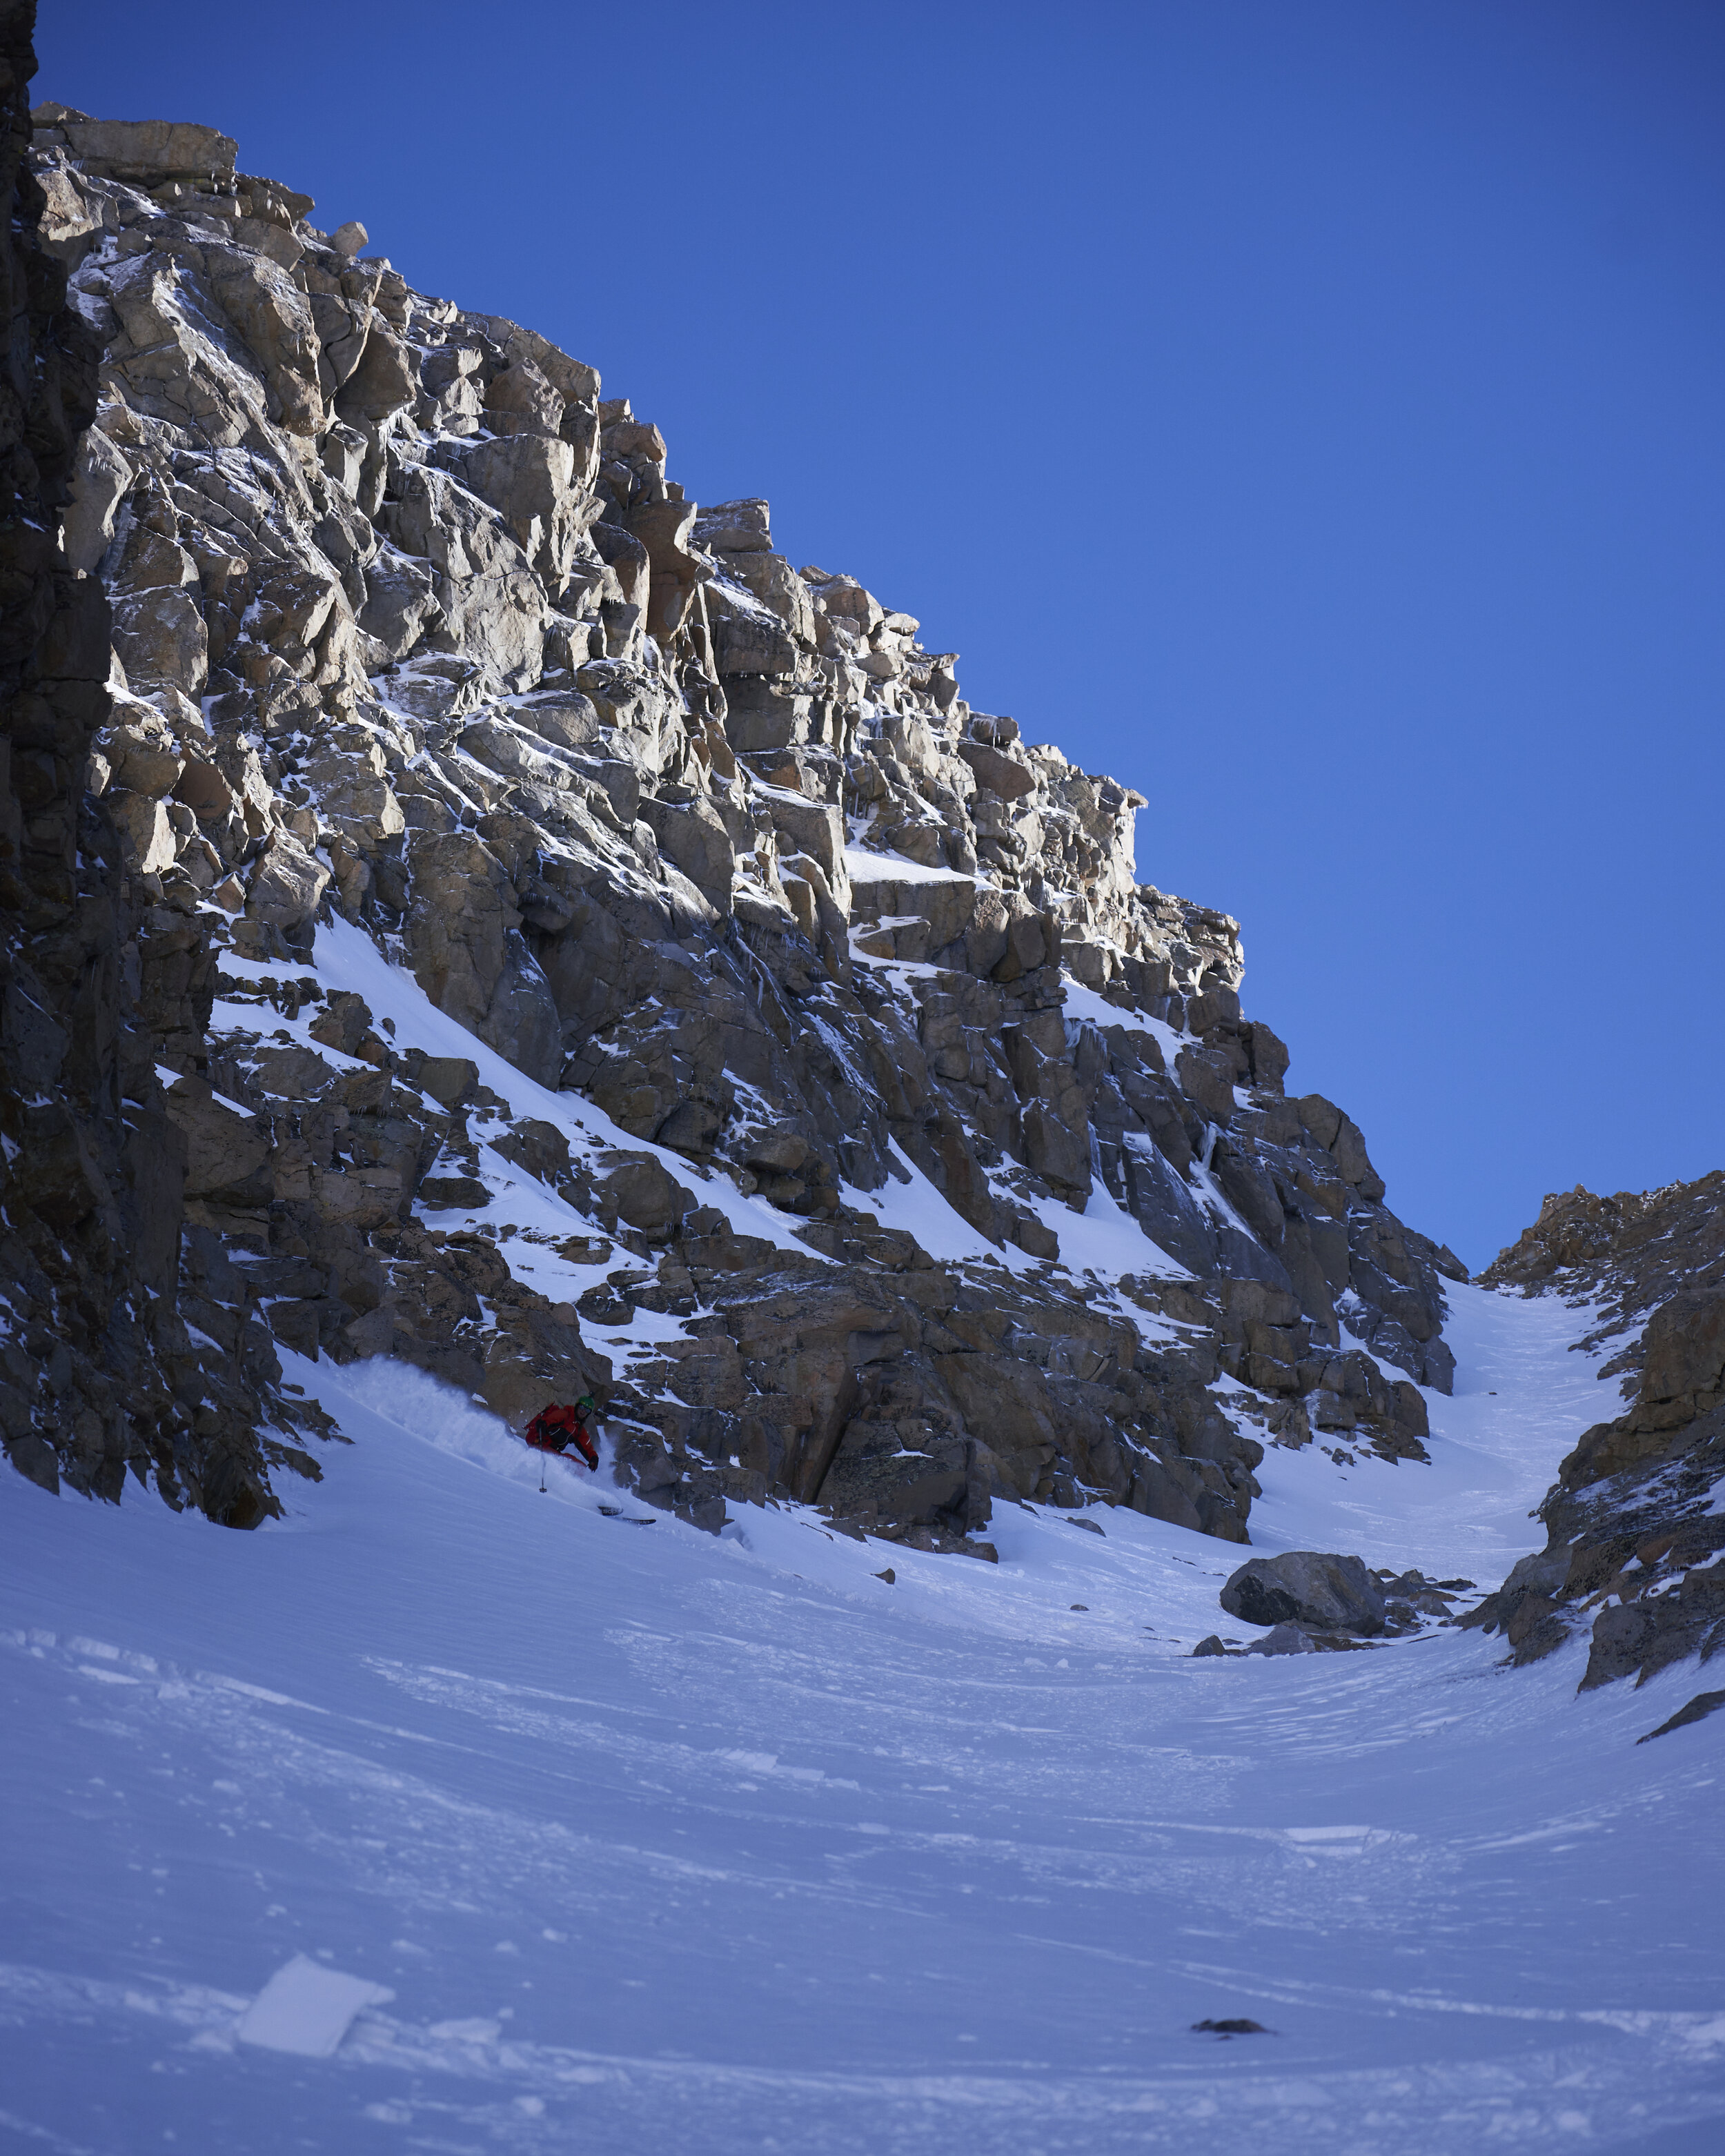 Skiing down the South Couloir of Whitetail